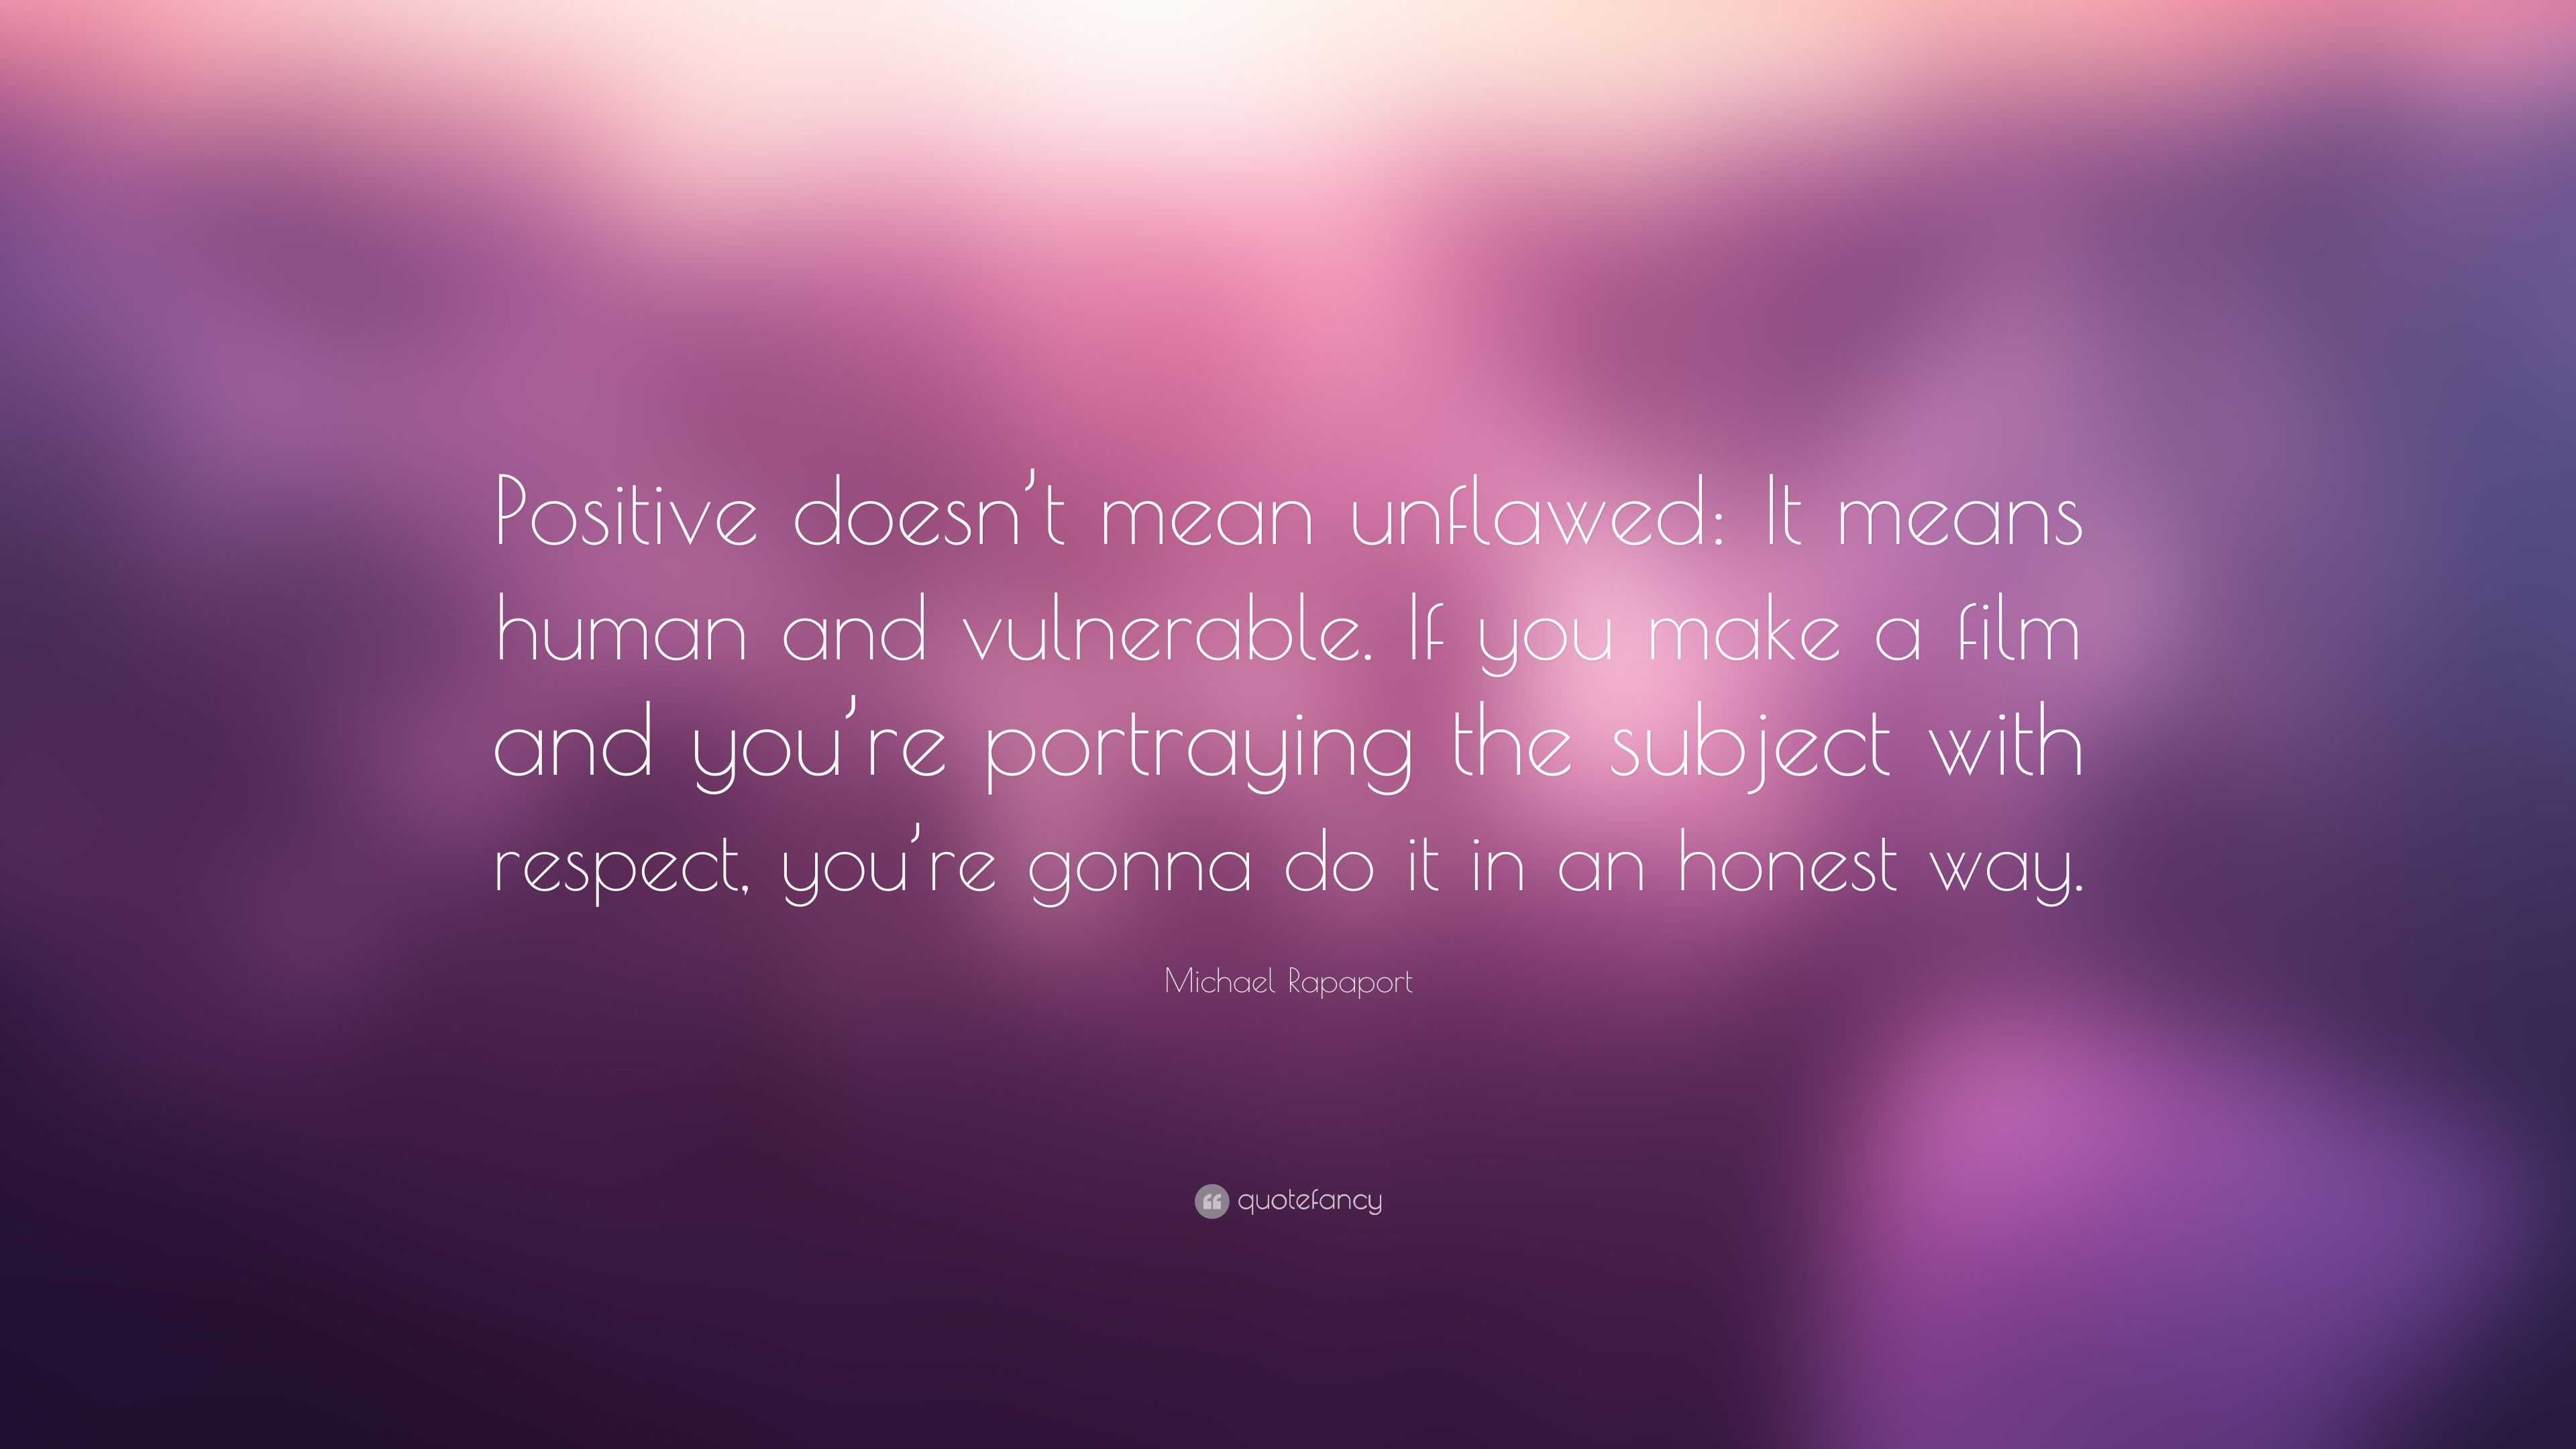 Michael Rapaport Quote: “Positive doesn’t mean unflawed: It means human ...